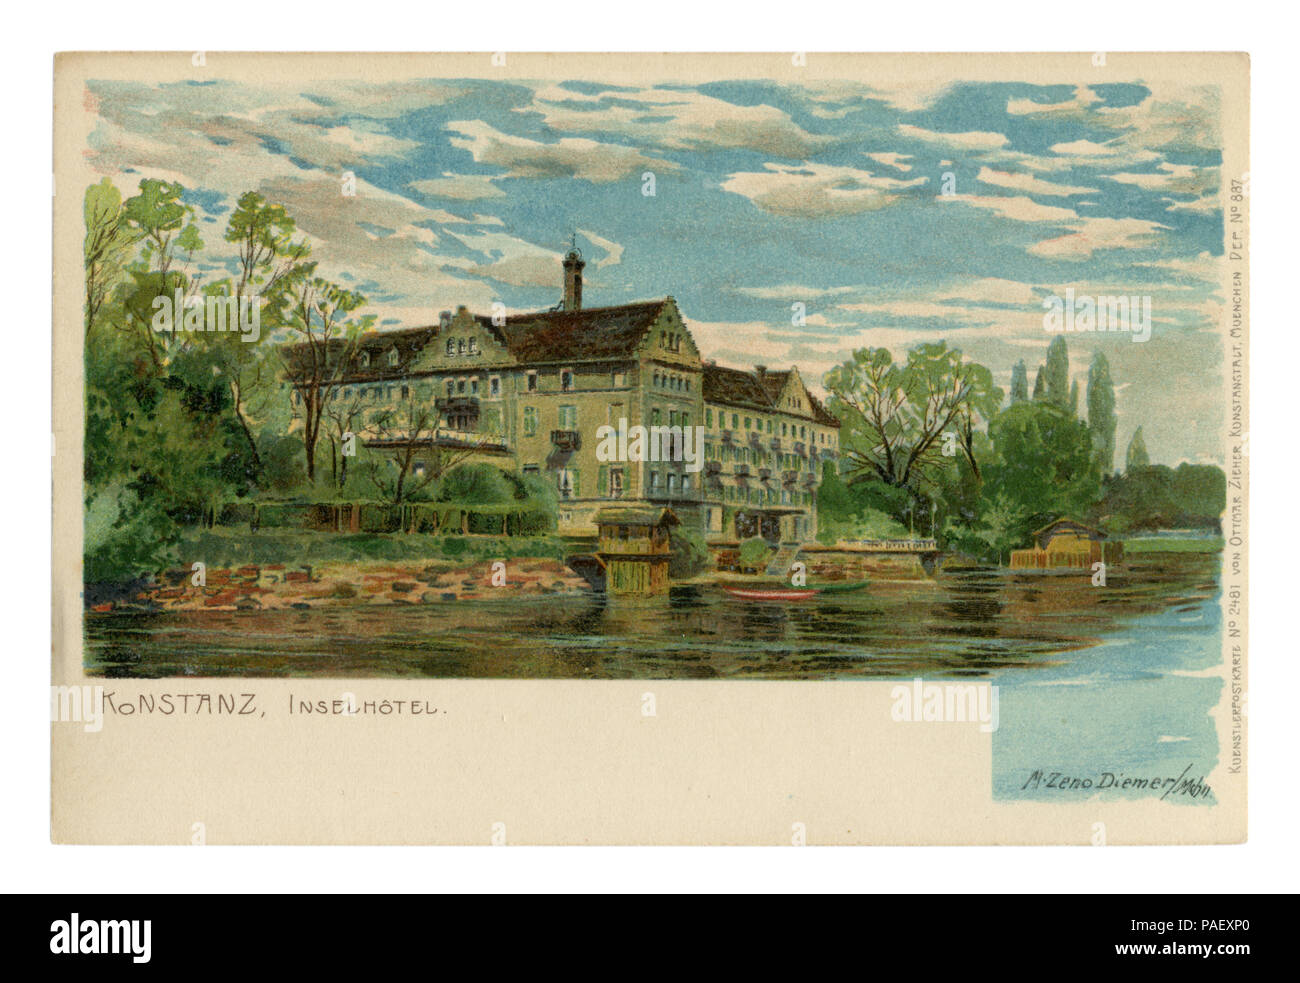 German historical postcard: An advertisement for the hotel. The building on the lake in the shade of trees. Lithography. Konstanz, Inselhotel. Germany Stock Photo